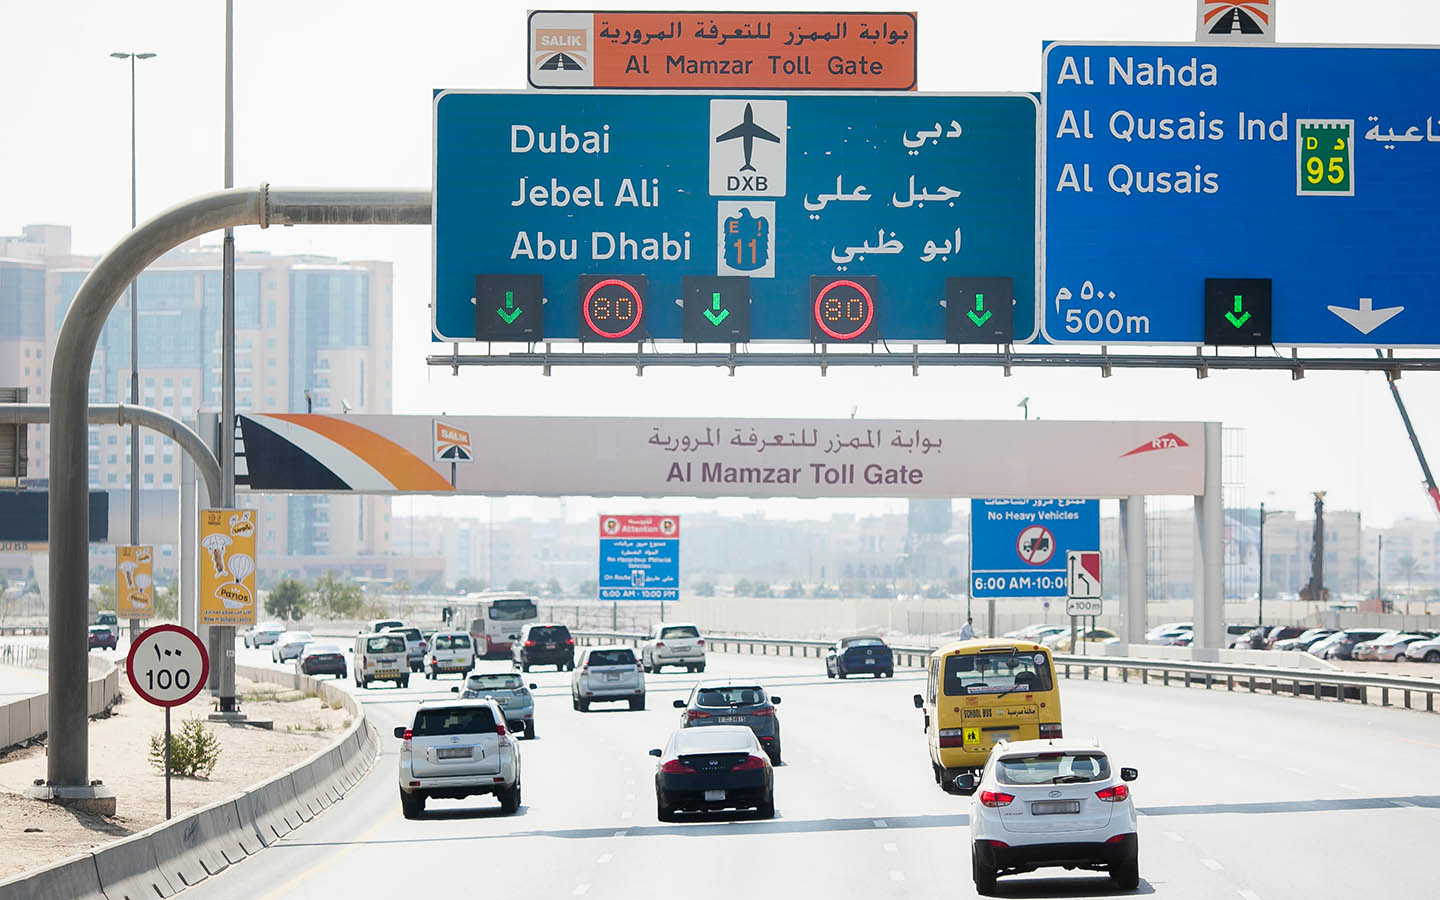 learn how to Apply for the Exemption from Salik Fees Dubai to enjoy a hassle-free driving experience